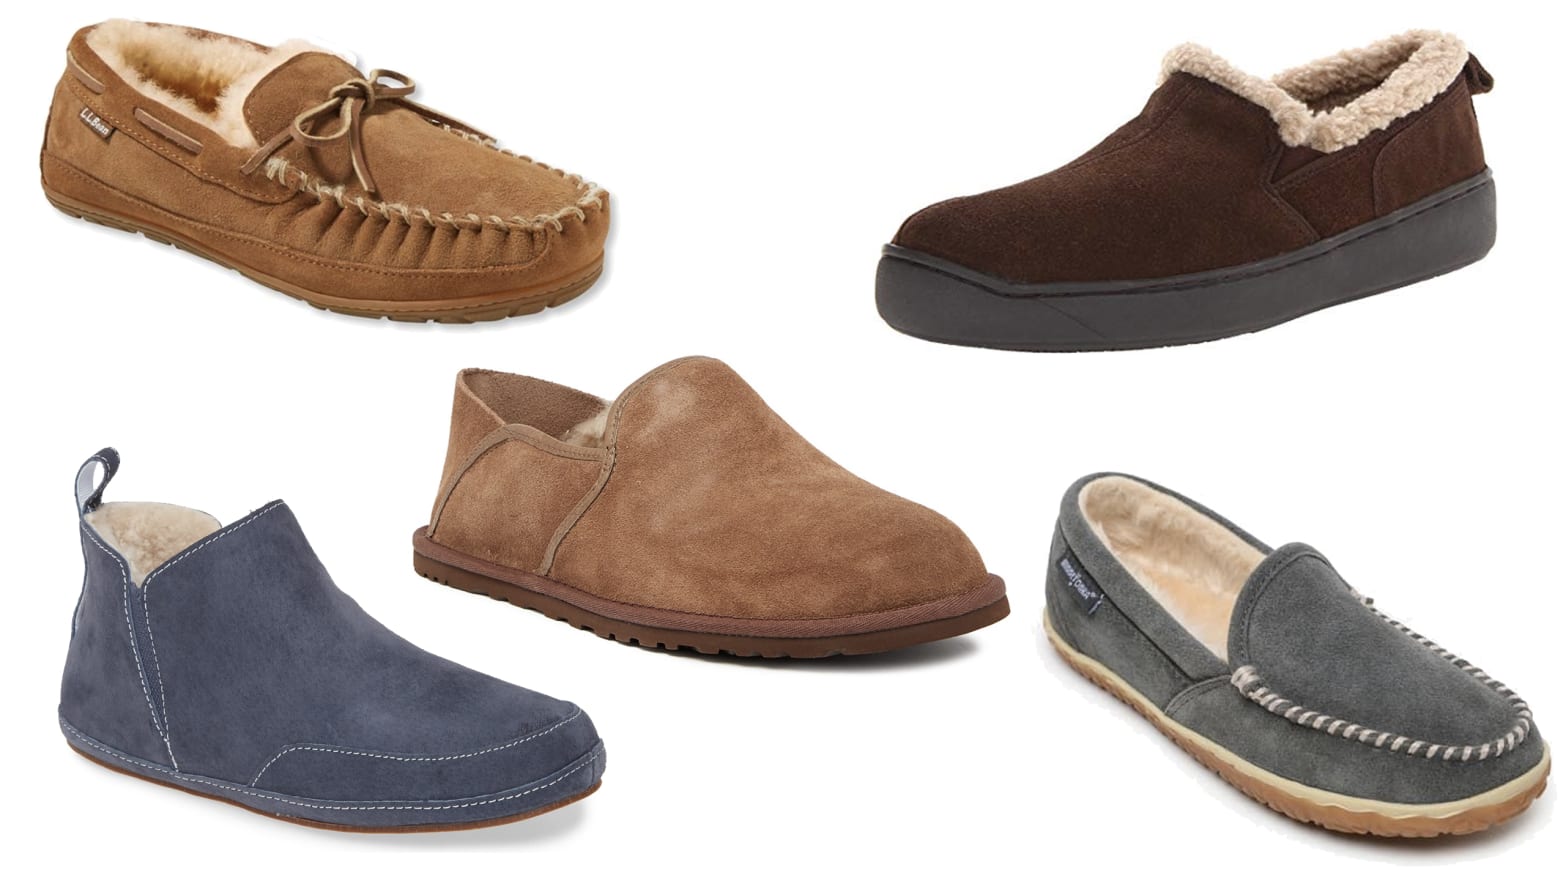 The Best Sherpa and Shearling Slippers from UGG, Minnetonka, L.L.Bean ...